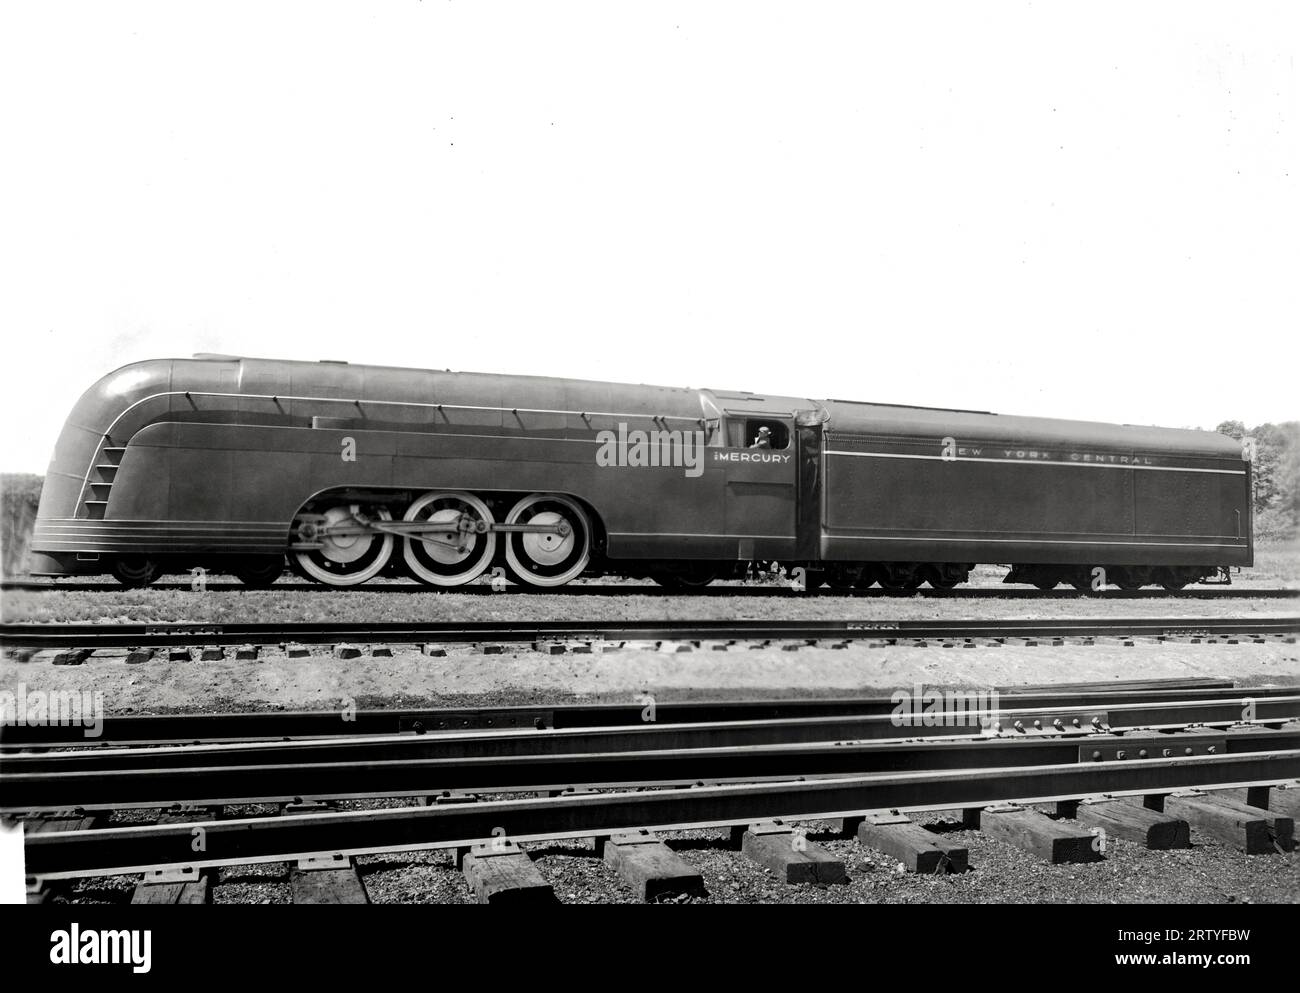 Detroit, Michigan: July 13, 1936. The first Mercury locomotive for the New York Central Railroad, designed by noted industrial designer Henry Dreyfuss, will operate between Cleveland and Detroit. It is considered a prime example of Art Deco design. Stock Photo